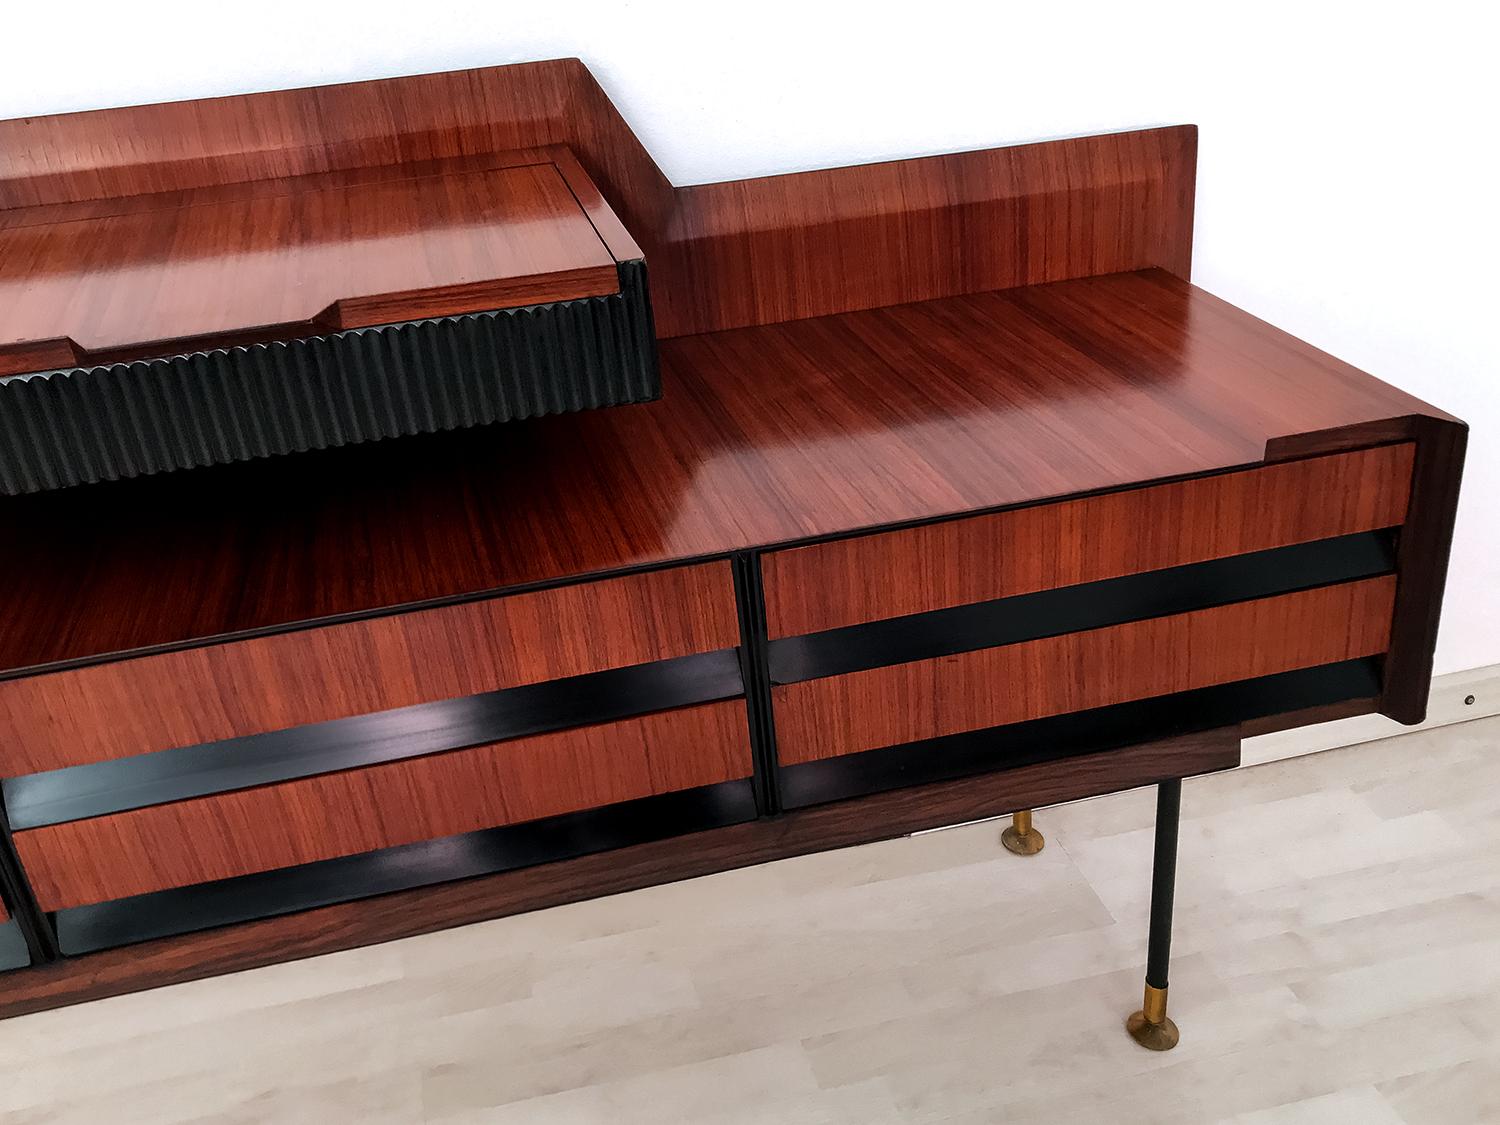 Italian Mid-Century Teak Wood Sideboard with Drawers by Vittorio Dassi, 1950s 11